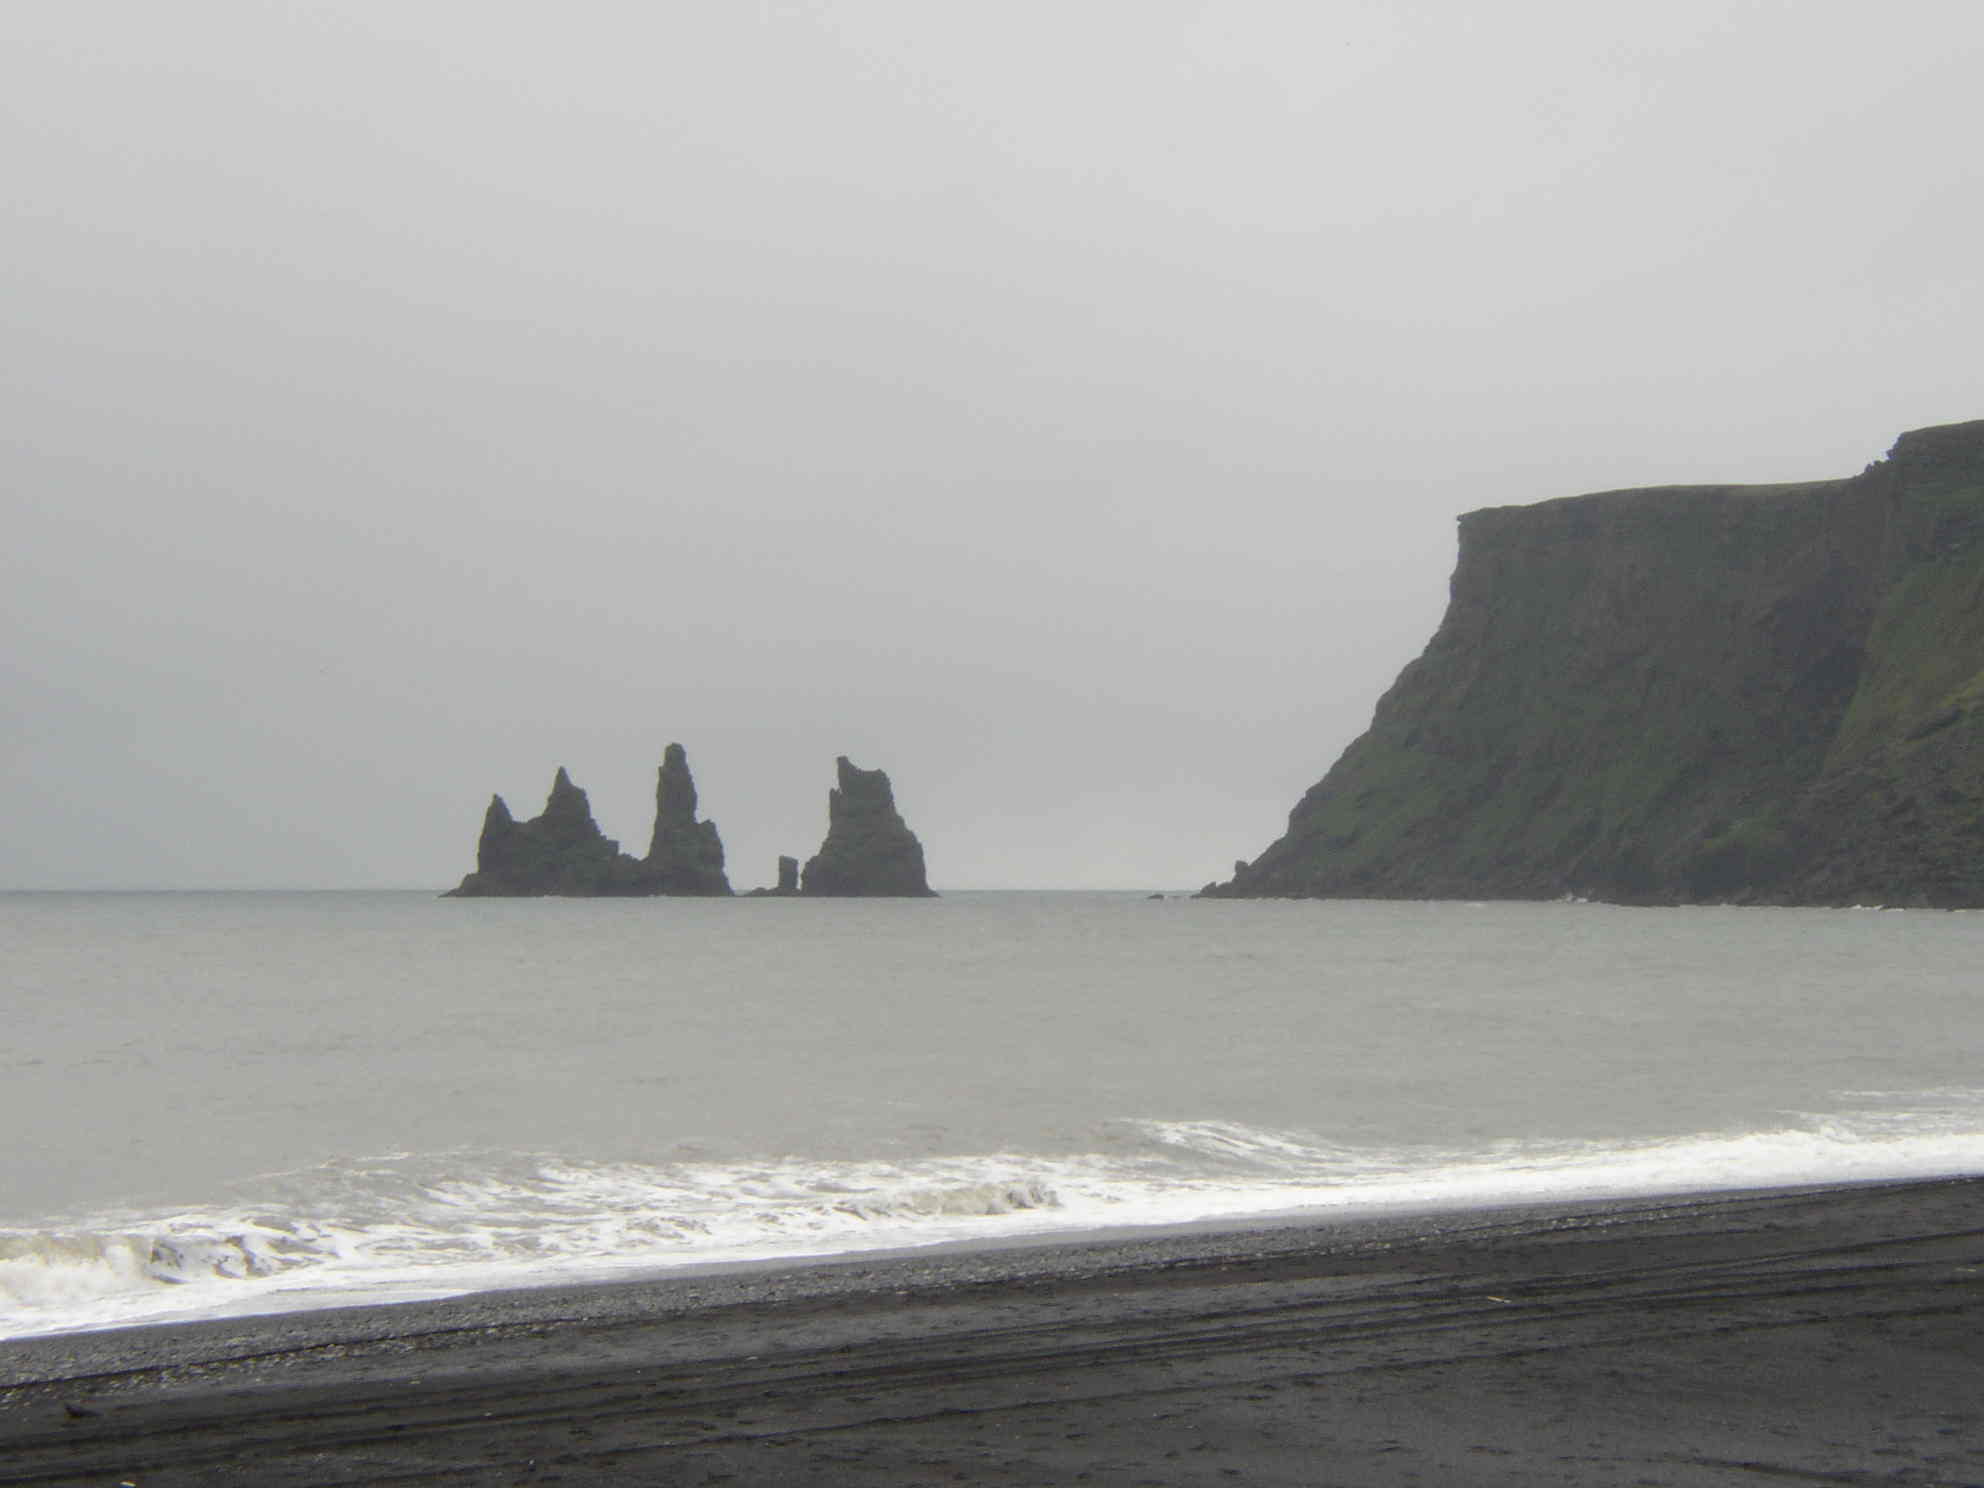 Rock formations off the coast of Vik, Iceland